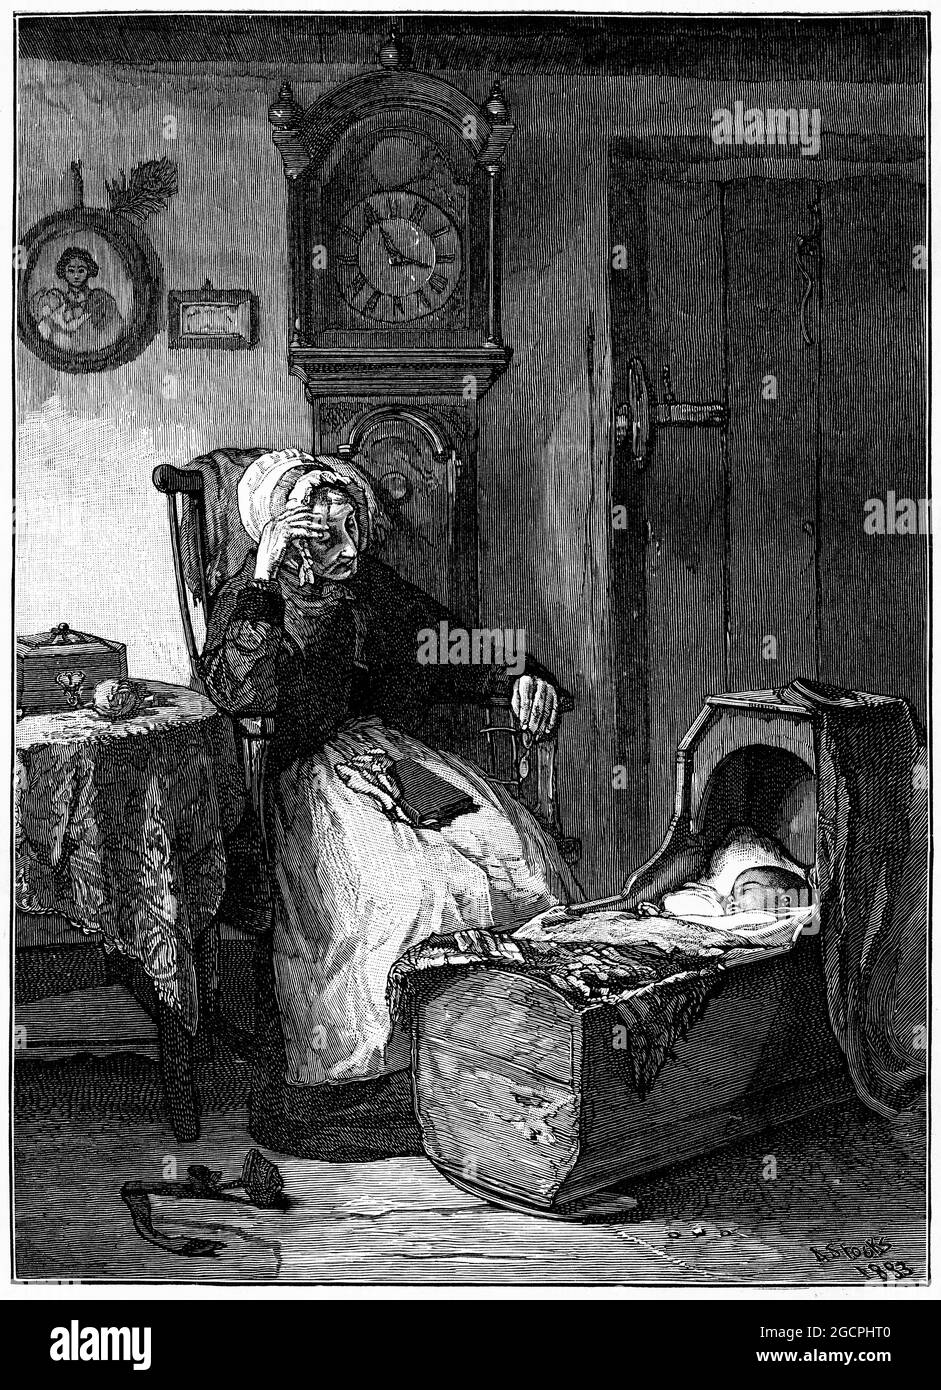 illustration of an elderly woman tending to a baby in its cradle, Victorian English setting Stock Photo